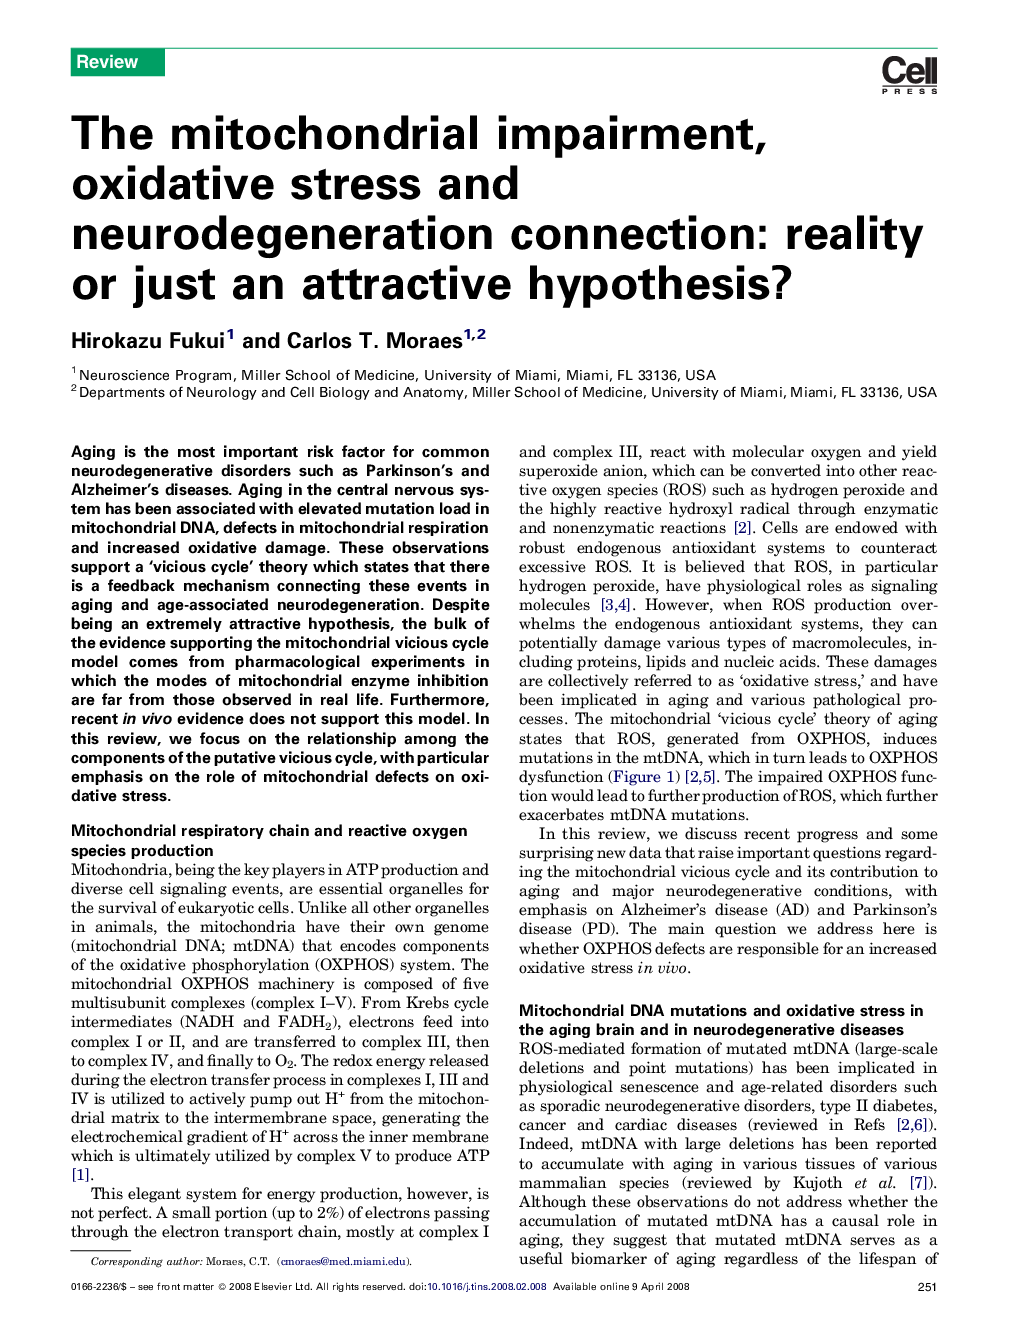 The mitochondrial impairment, oxidative stress and neurodegeneration connection: reality or just an attractive hypothesis?